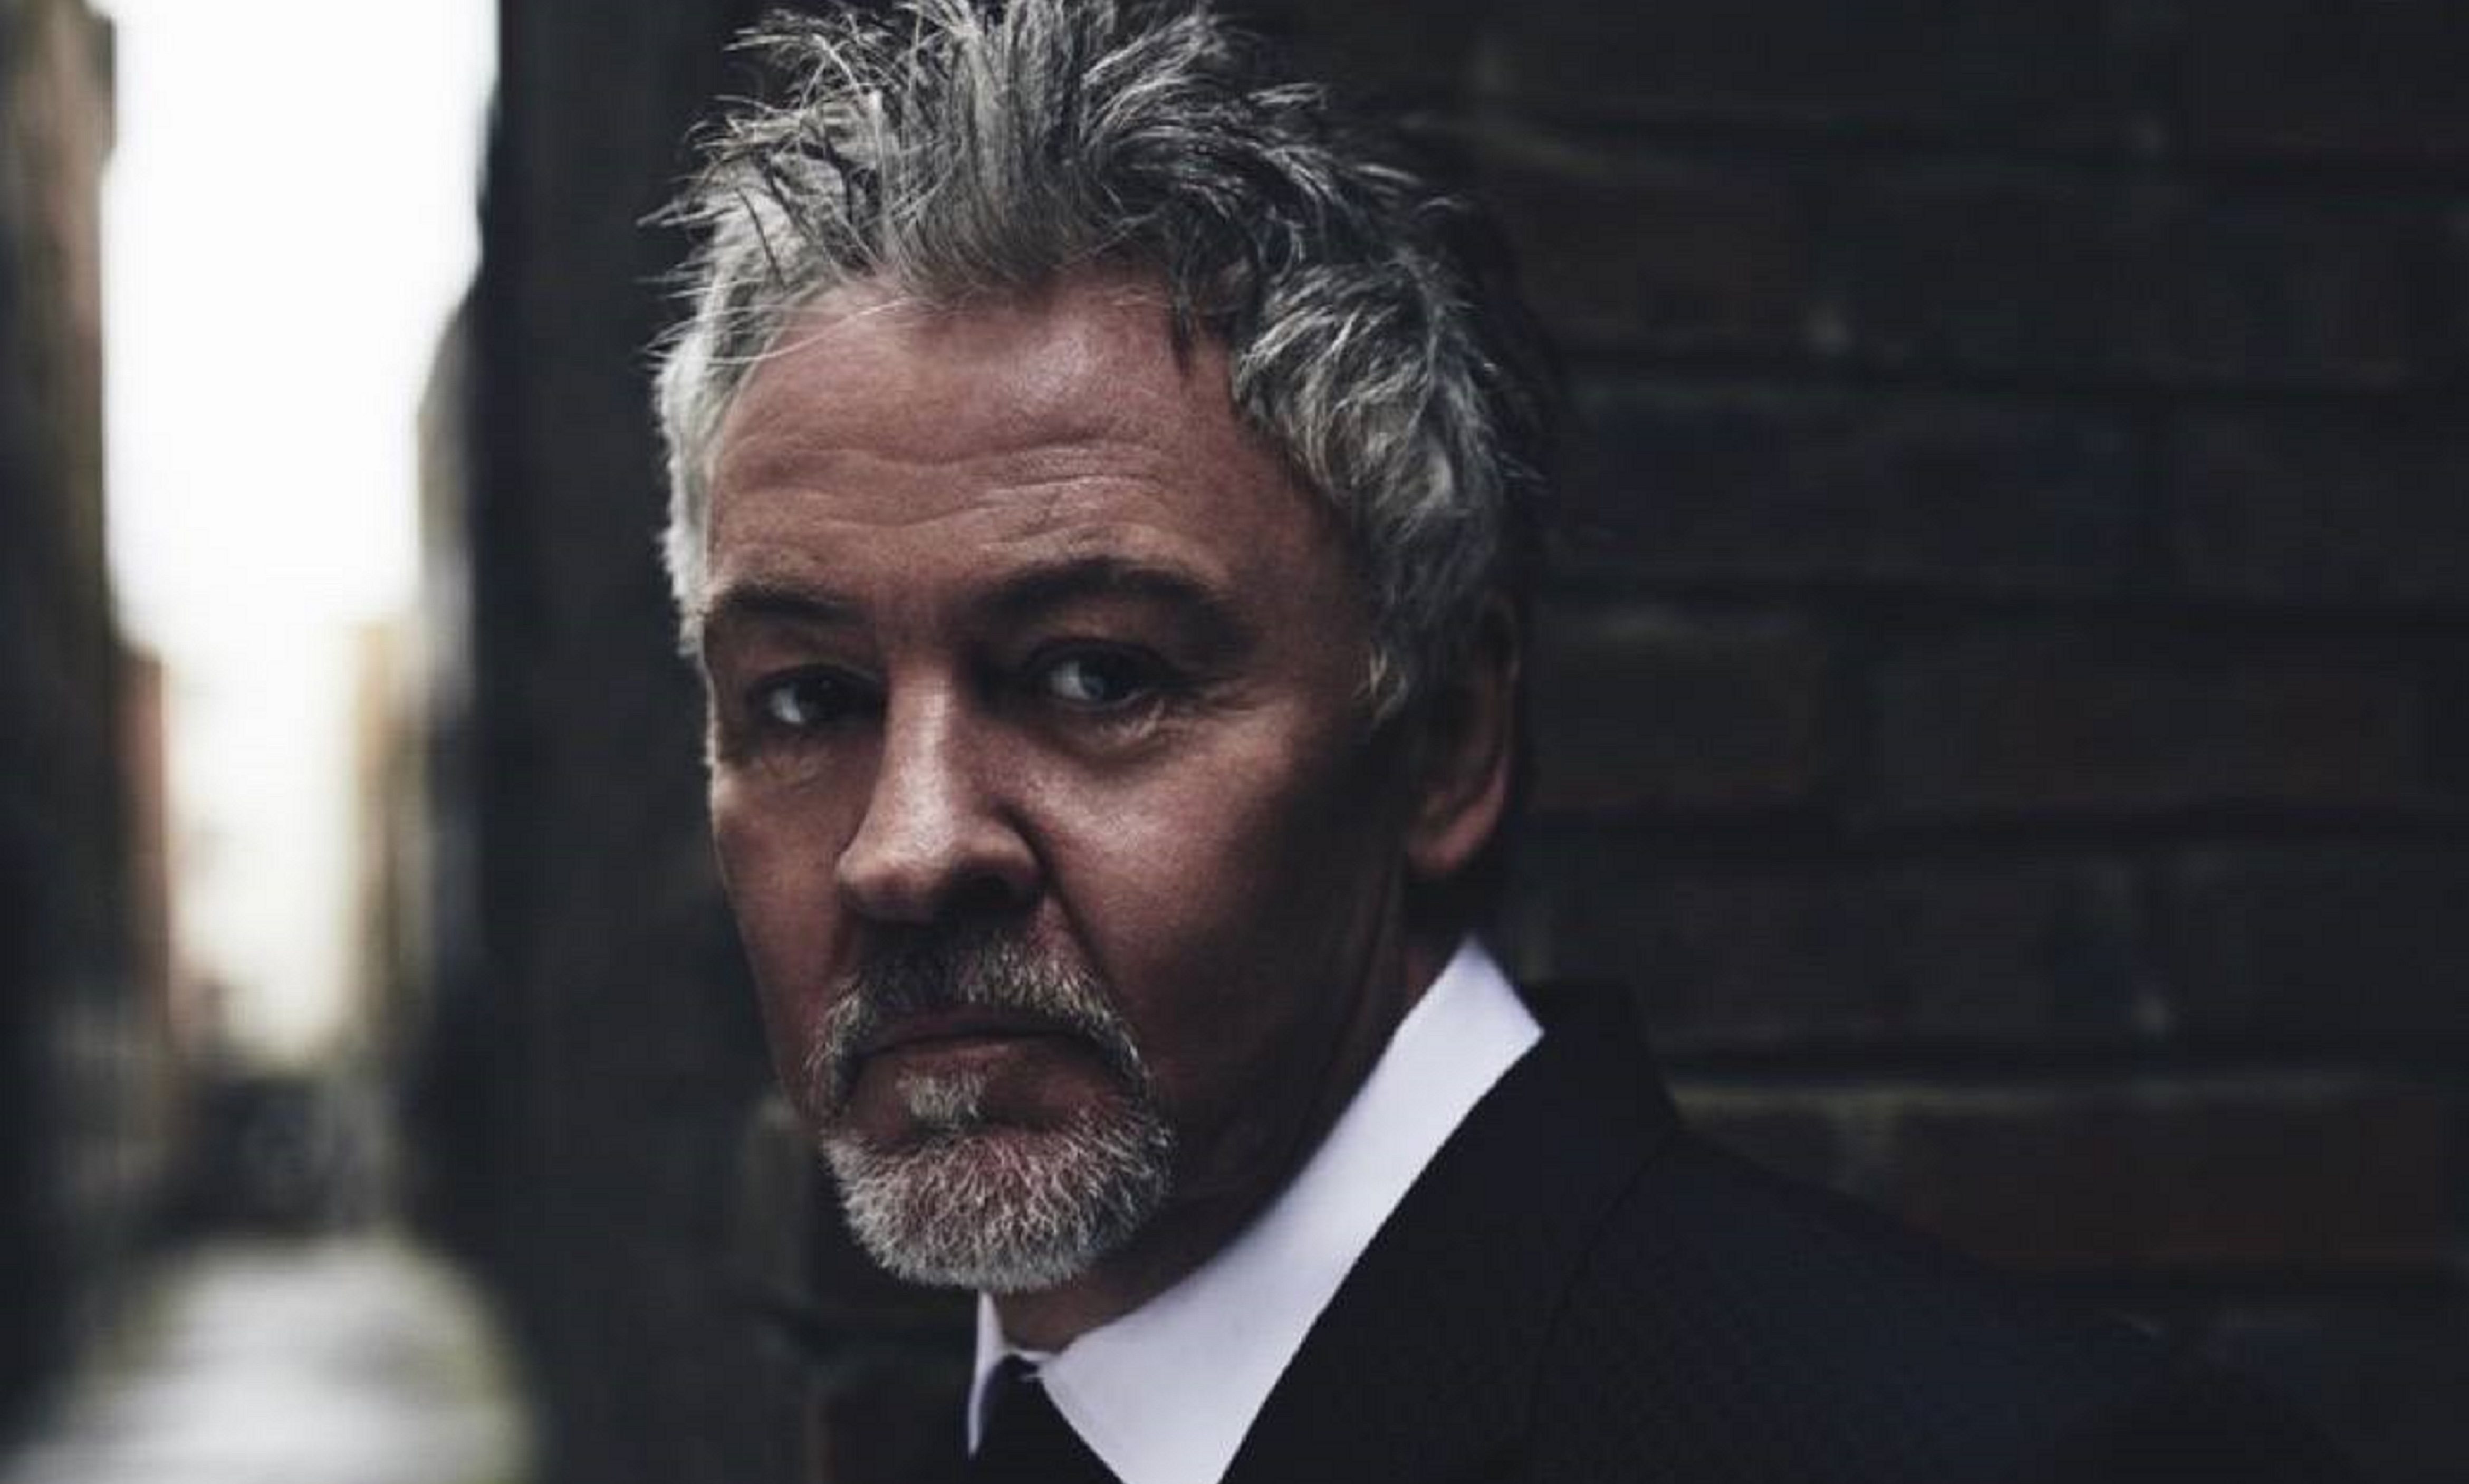 Paul Young is looking forward to playing Rewind.